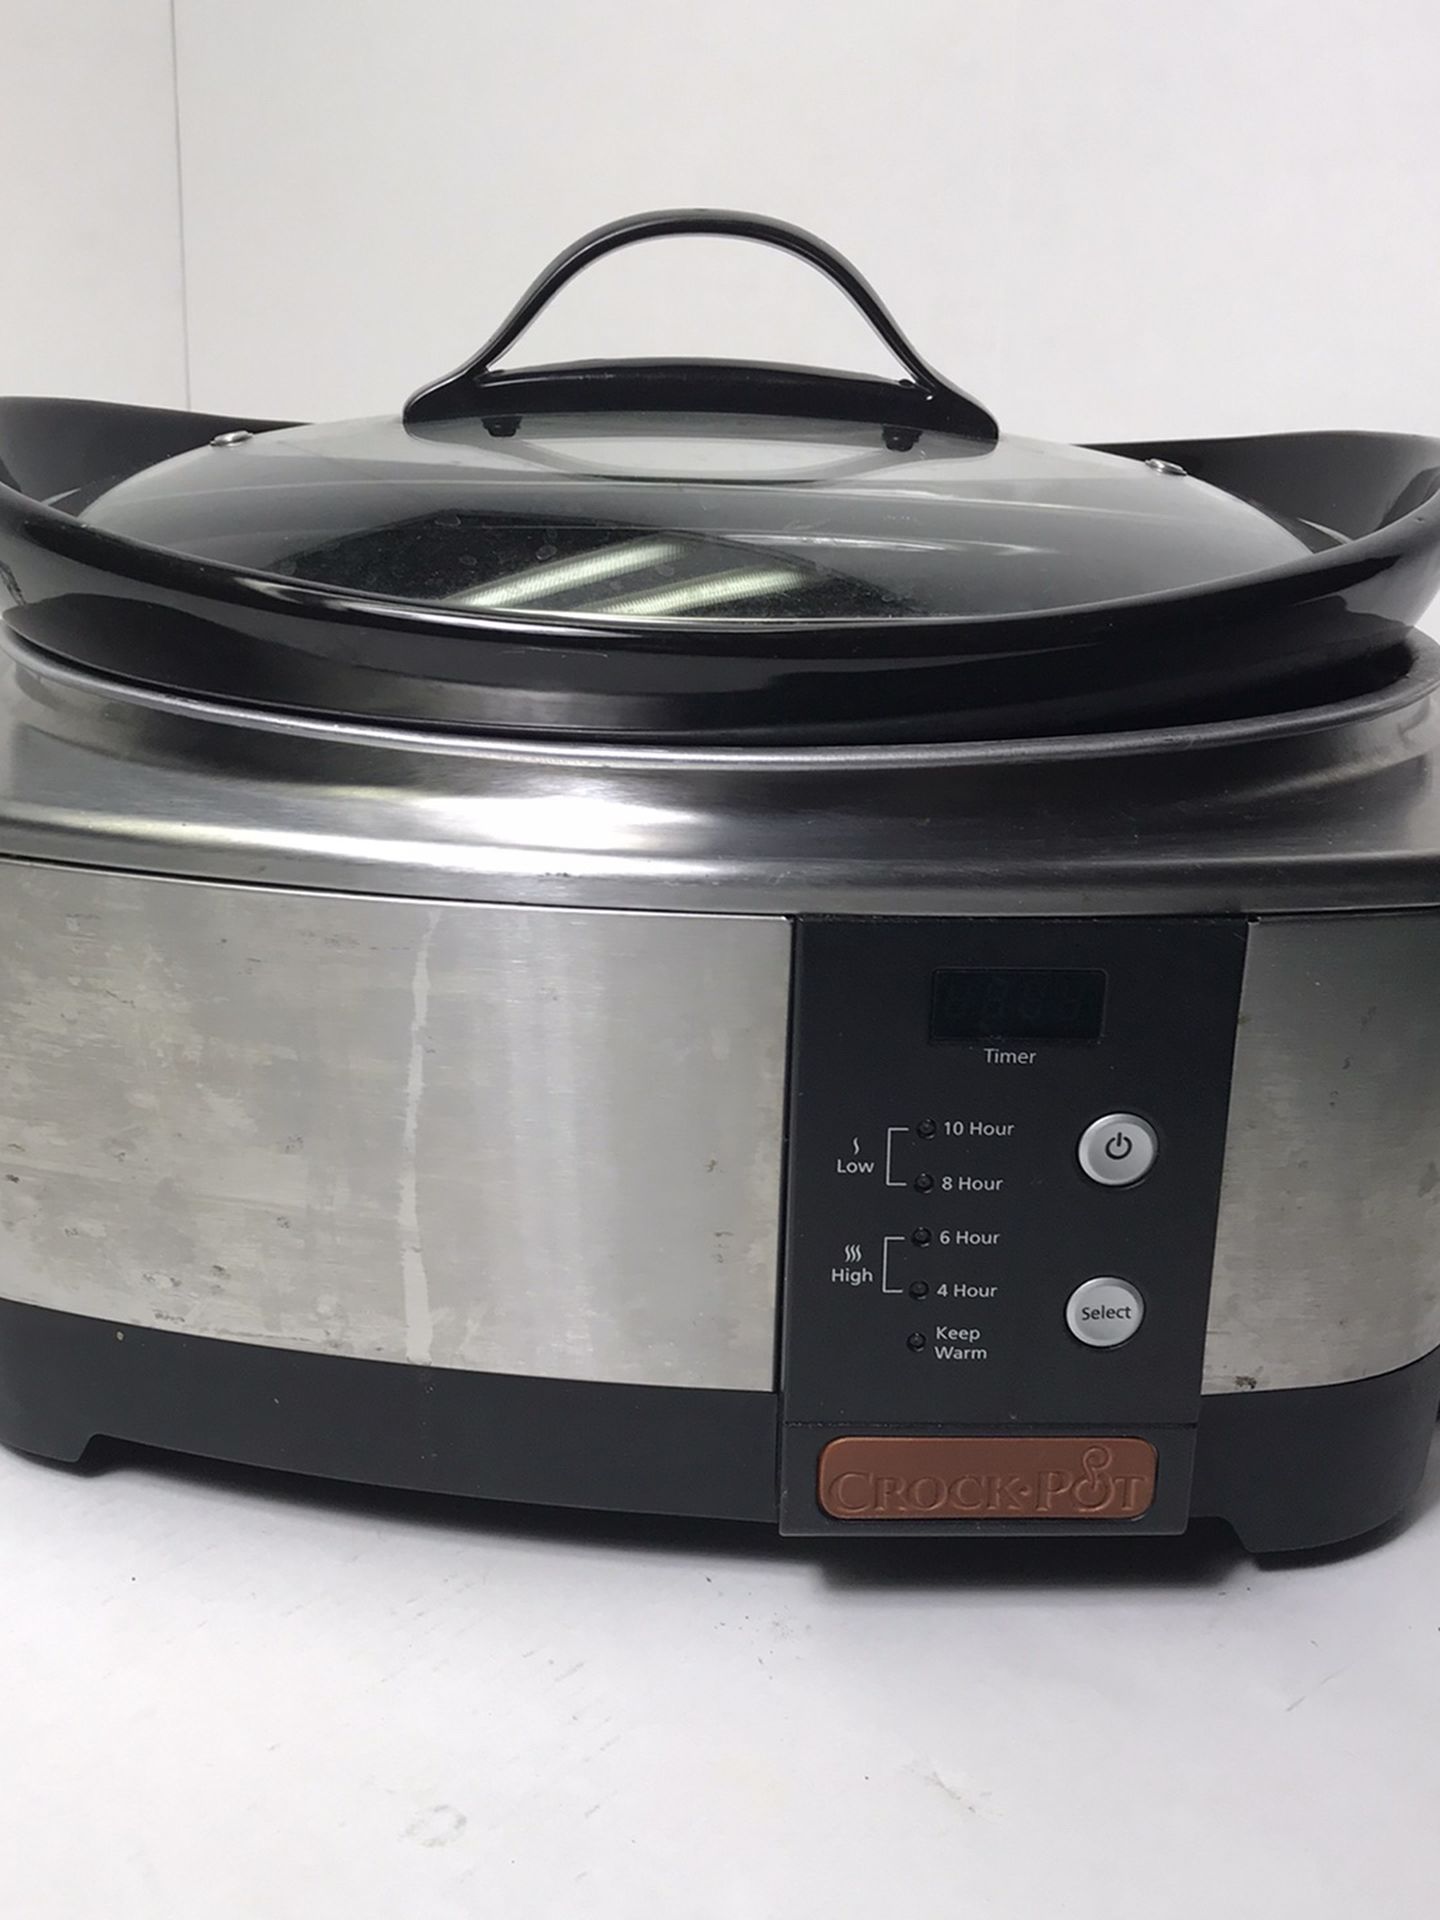 Crock-pot Sccpvl610-s 6 Quart Programmable Cook And Carry Oval Slow Cooker